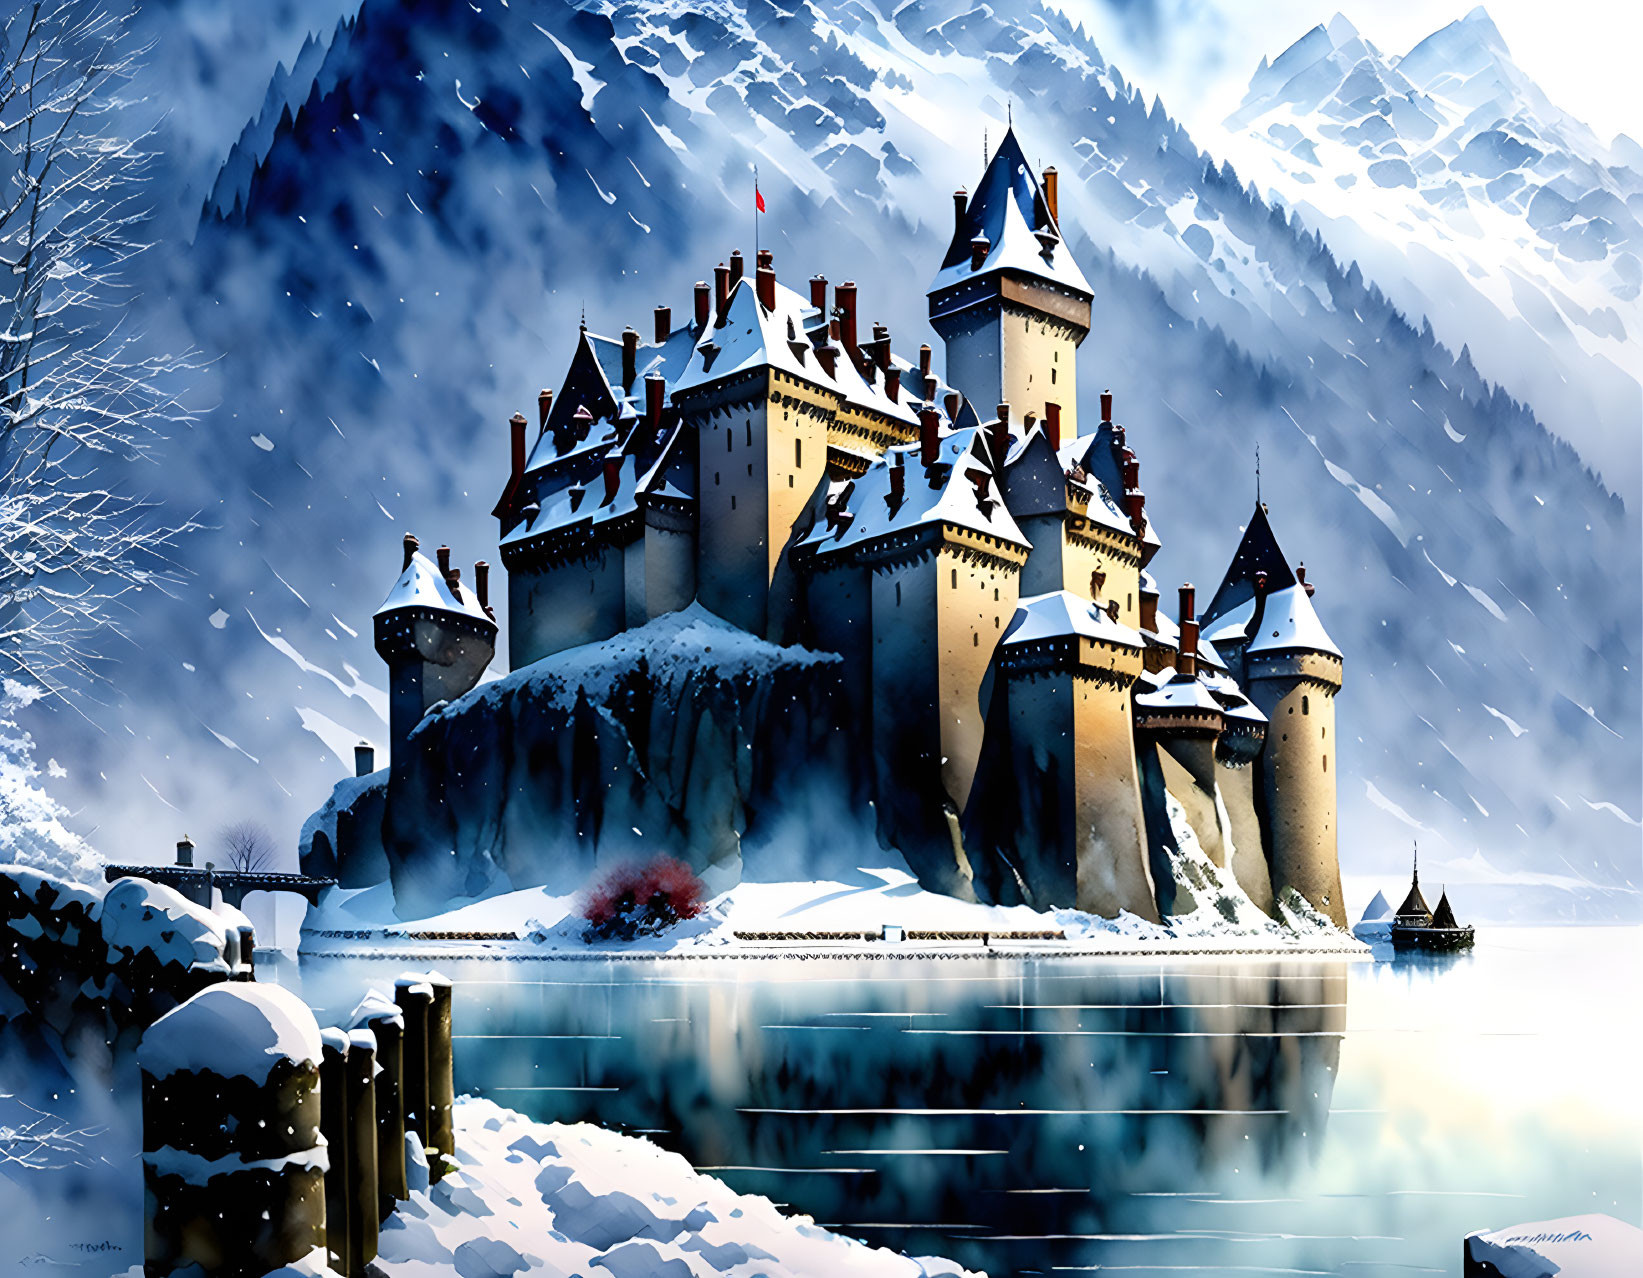 Snow-covered castle by tranquil lake and mountains under falling snowflakes